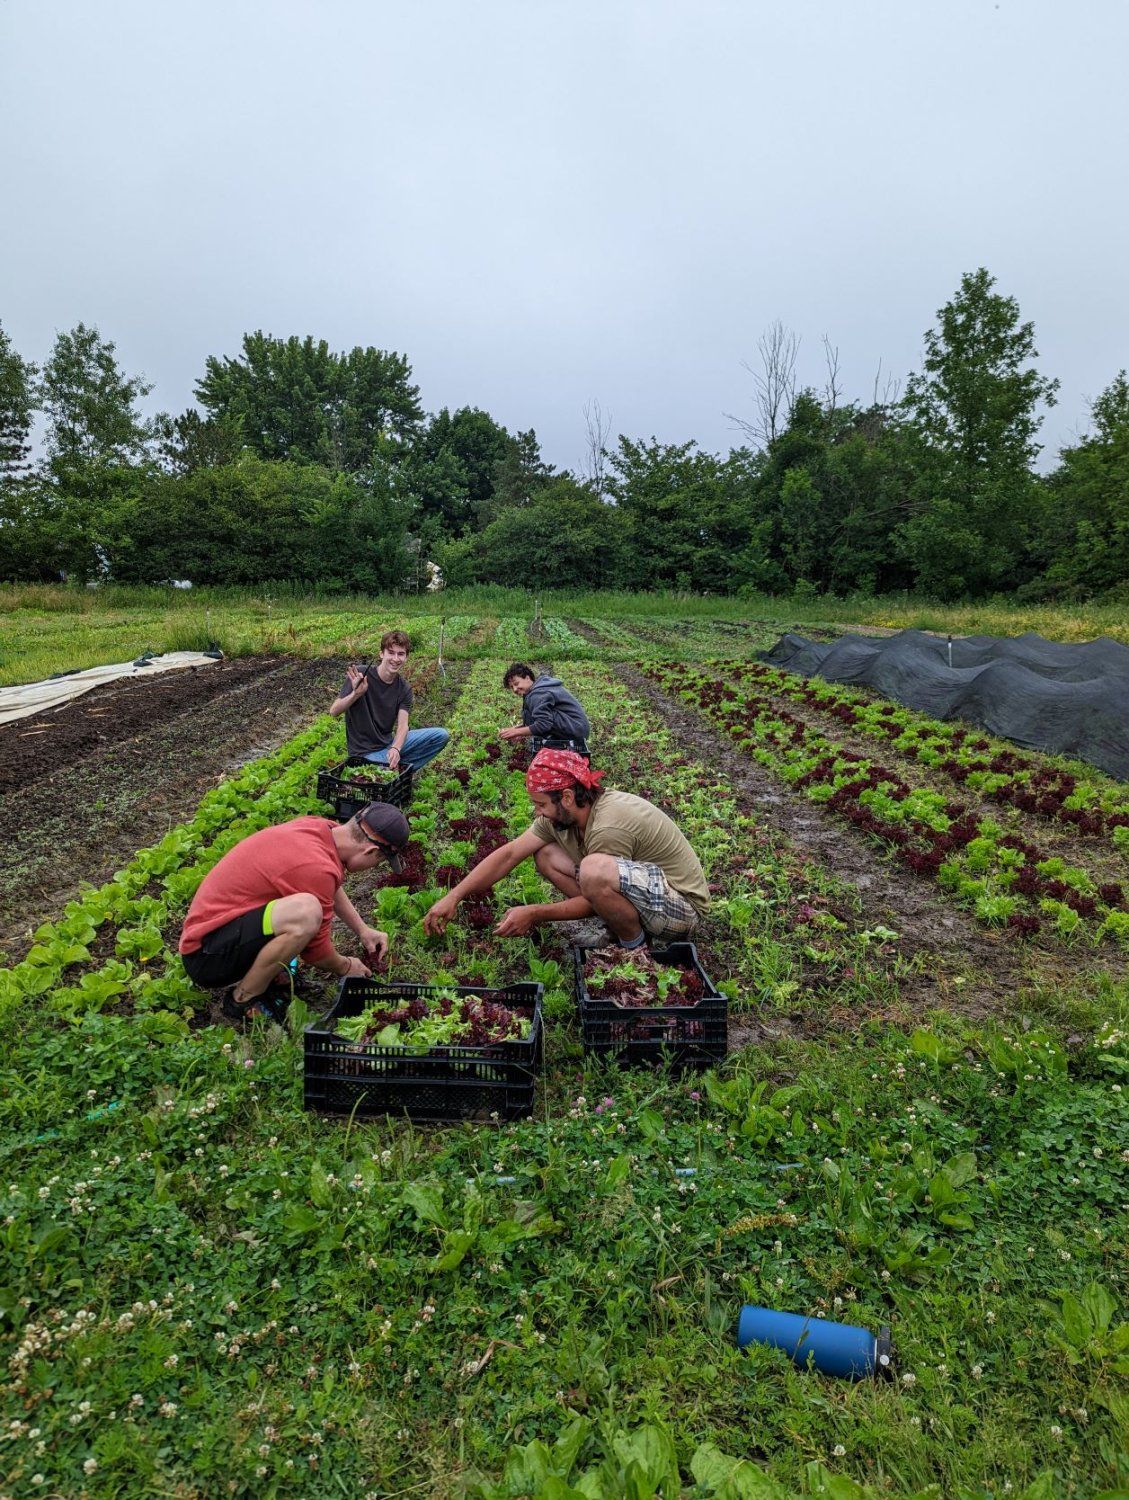 Previous Happening: 2022 Farm Share Week 6 - The Crew Expands